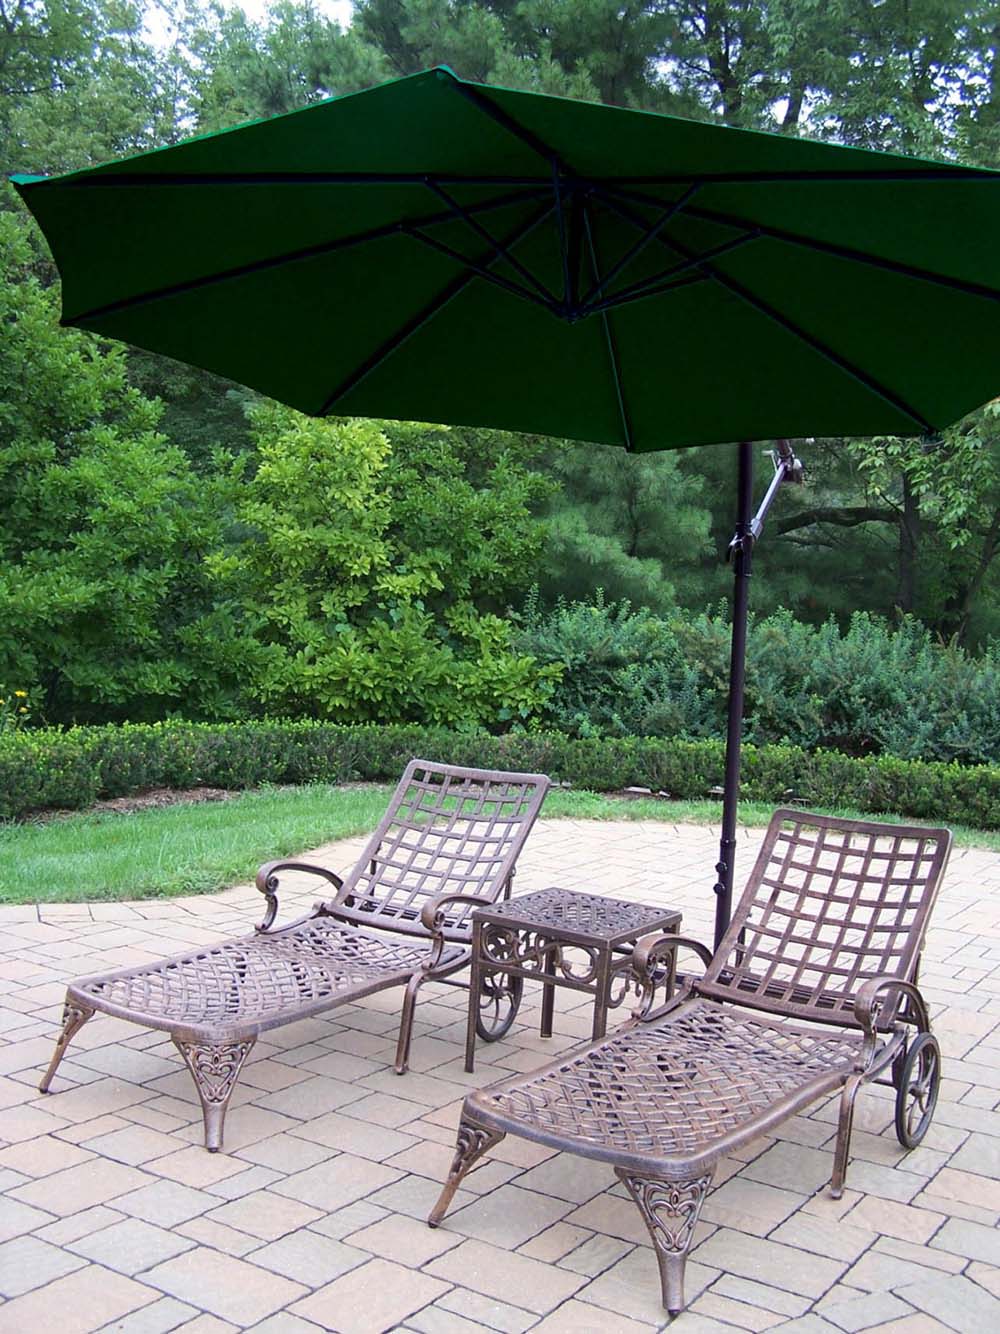 Elite Chaise Lounges: Side Table, Green Umbrella